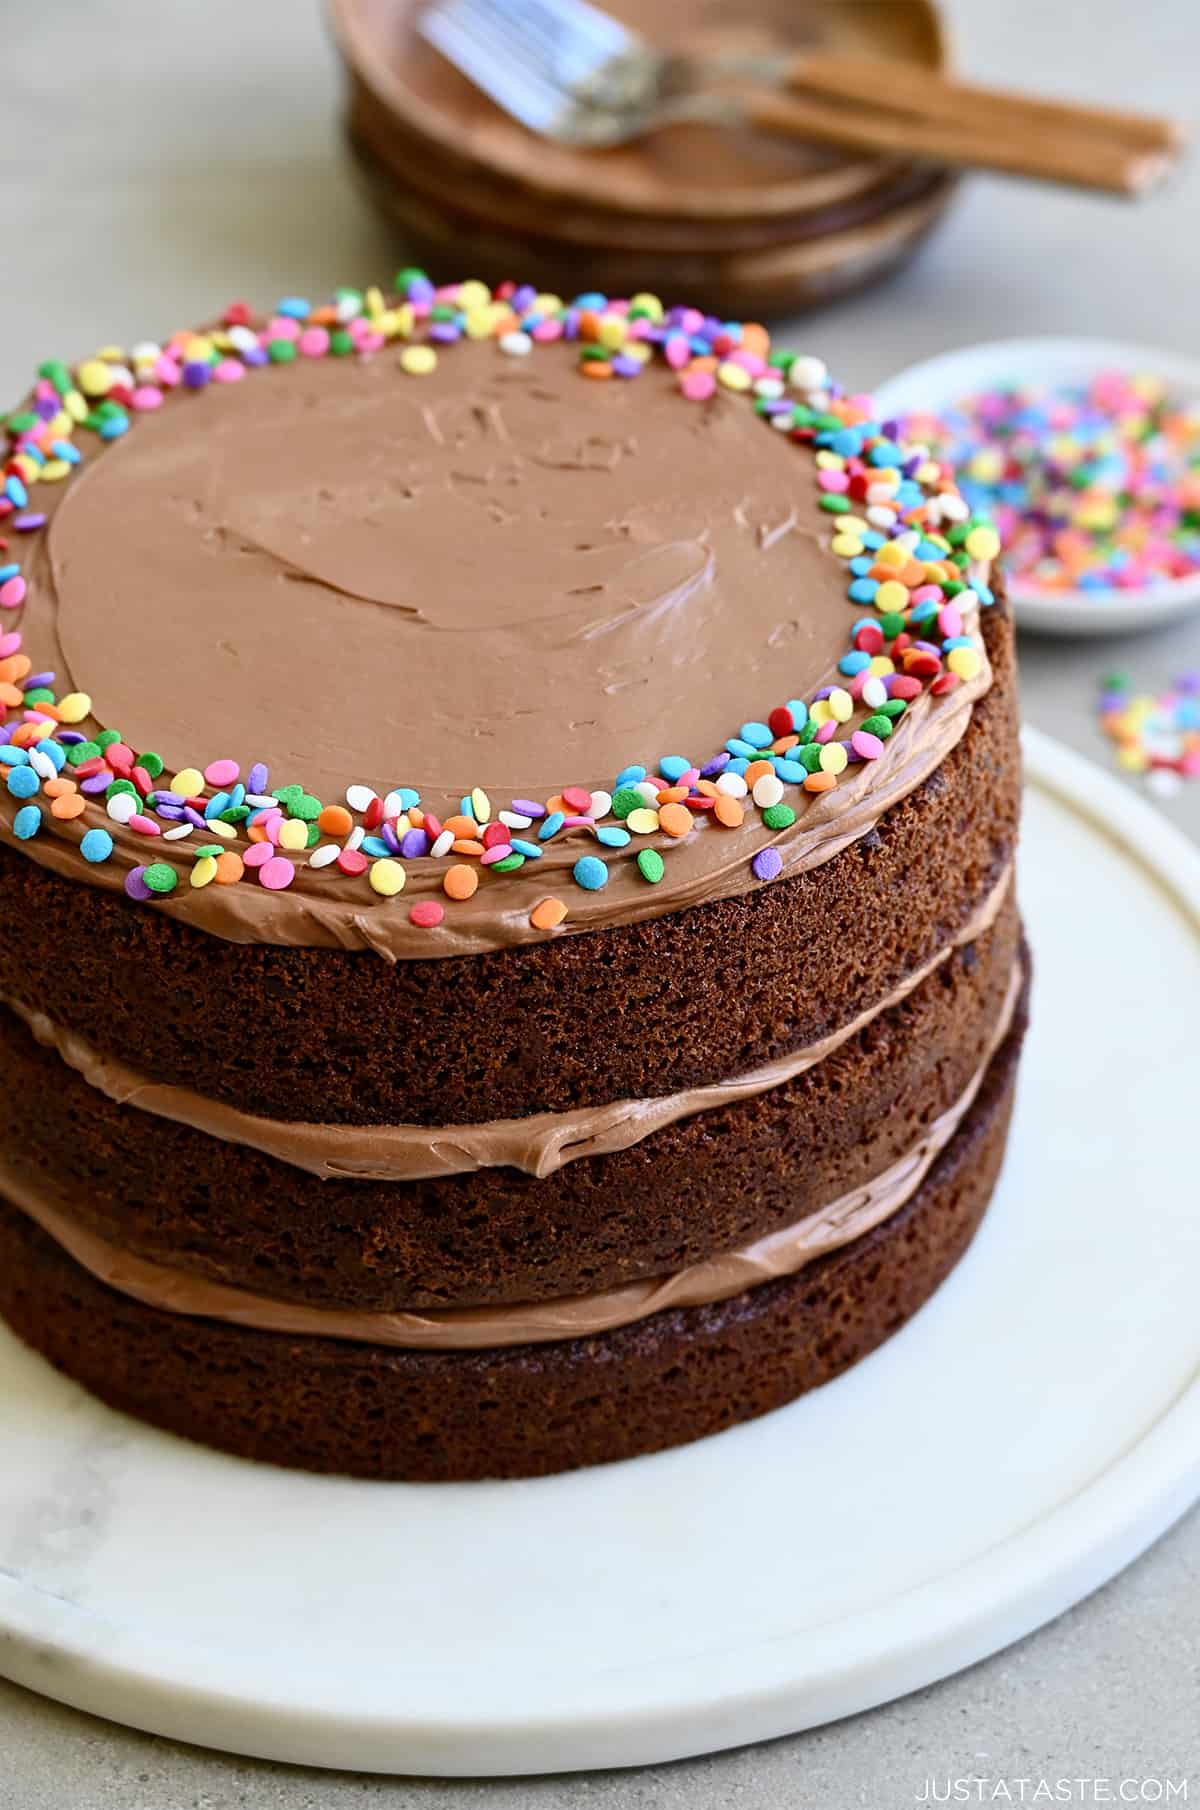 A three-tiered chocolate cake with layers of coffee frosting and topped with sprinkles.